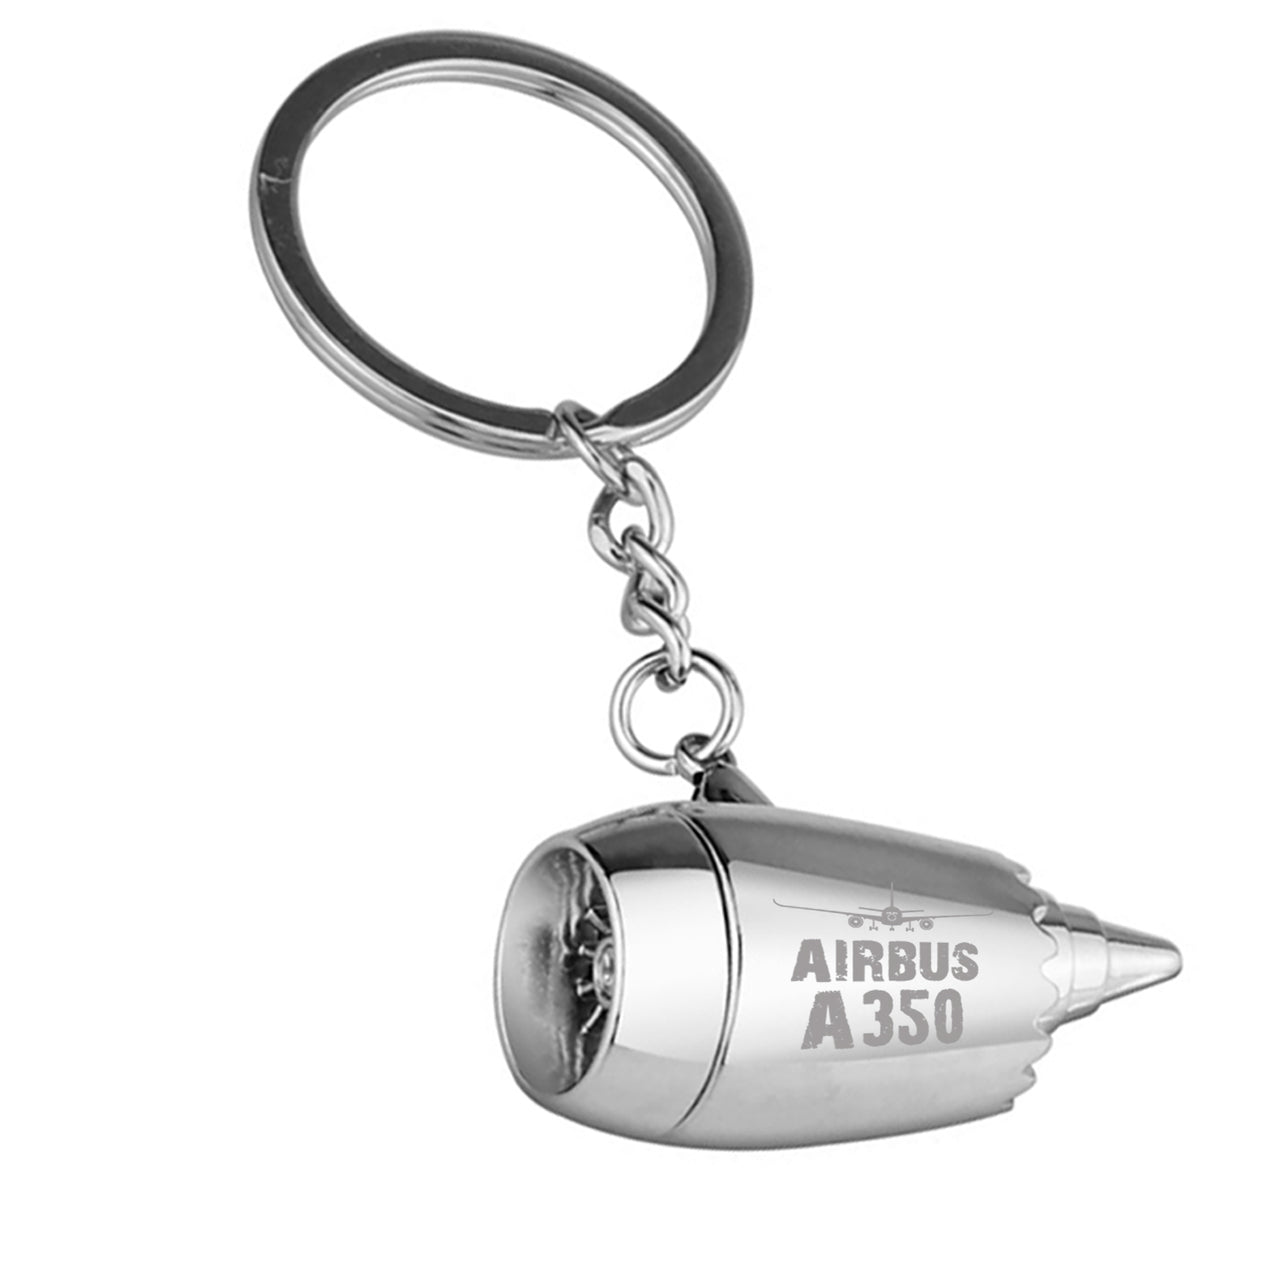 Airbus A350 & Plane Designed Airplane Jet Engine Shaped Key Chain